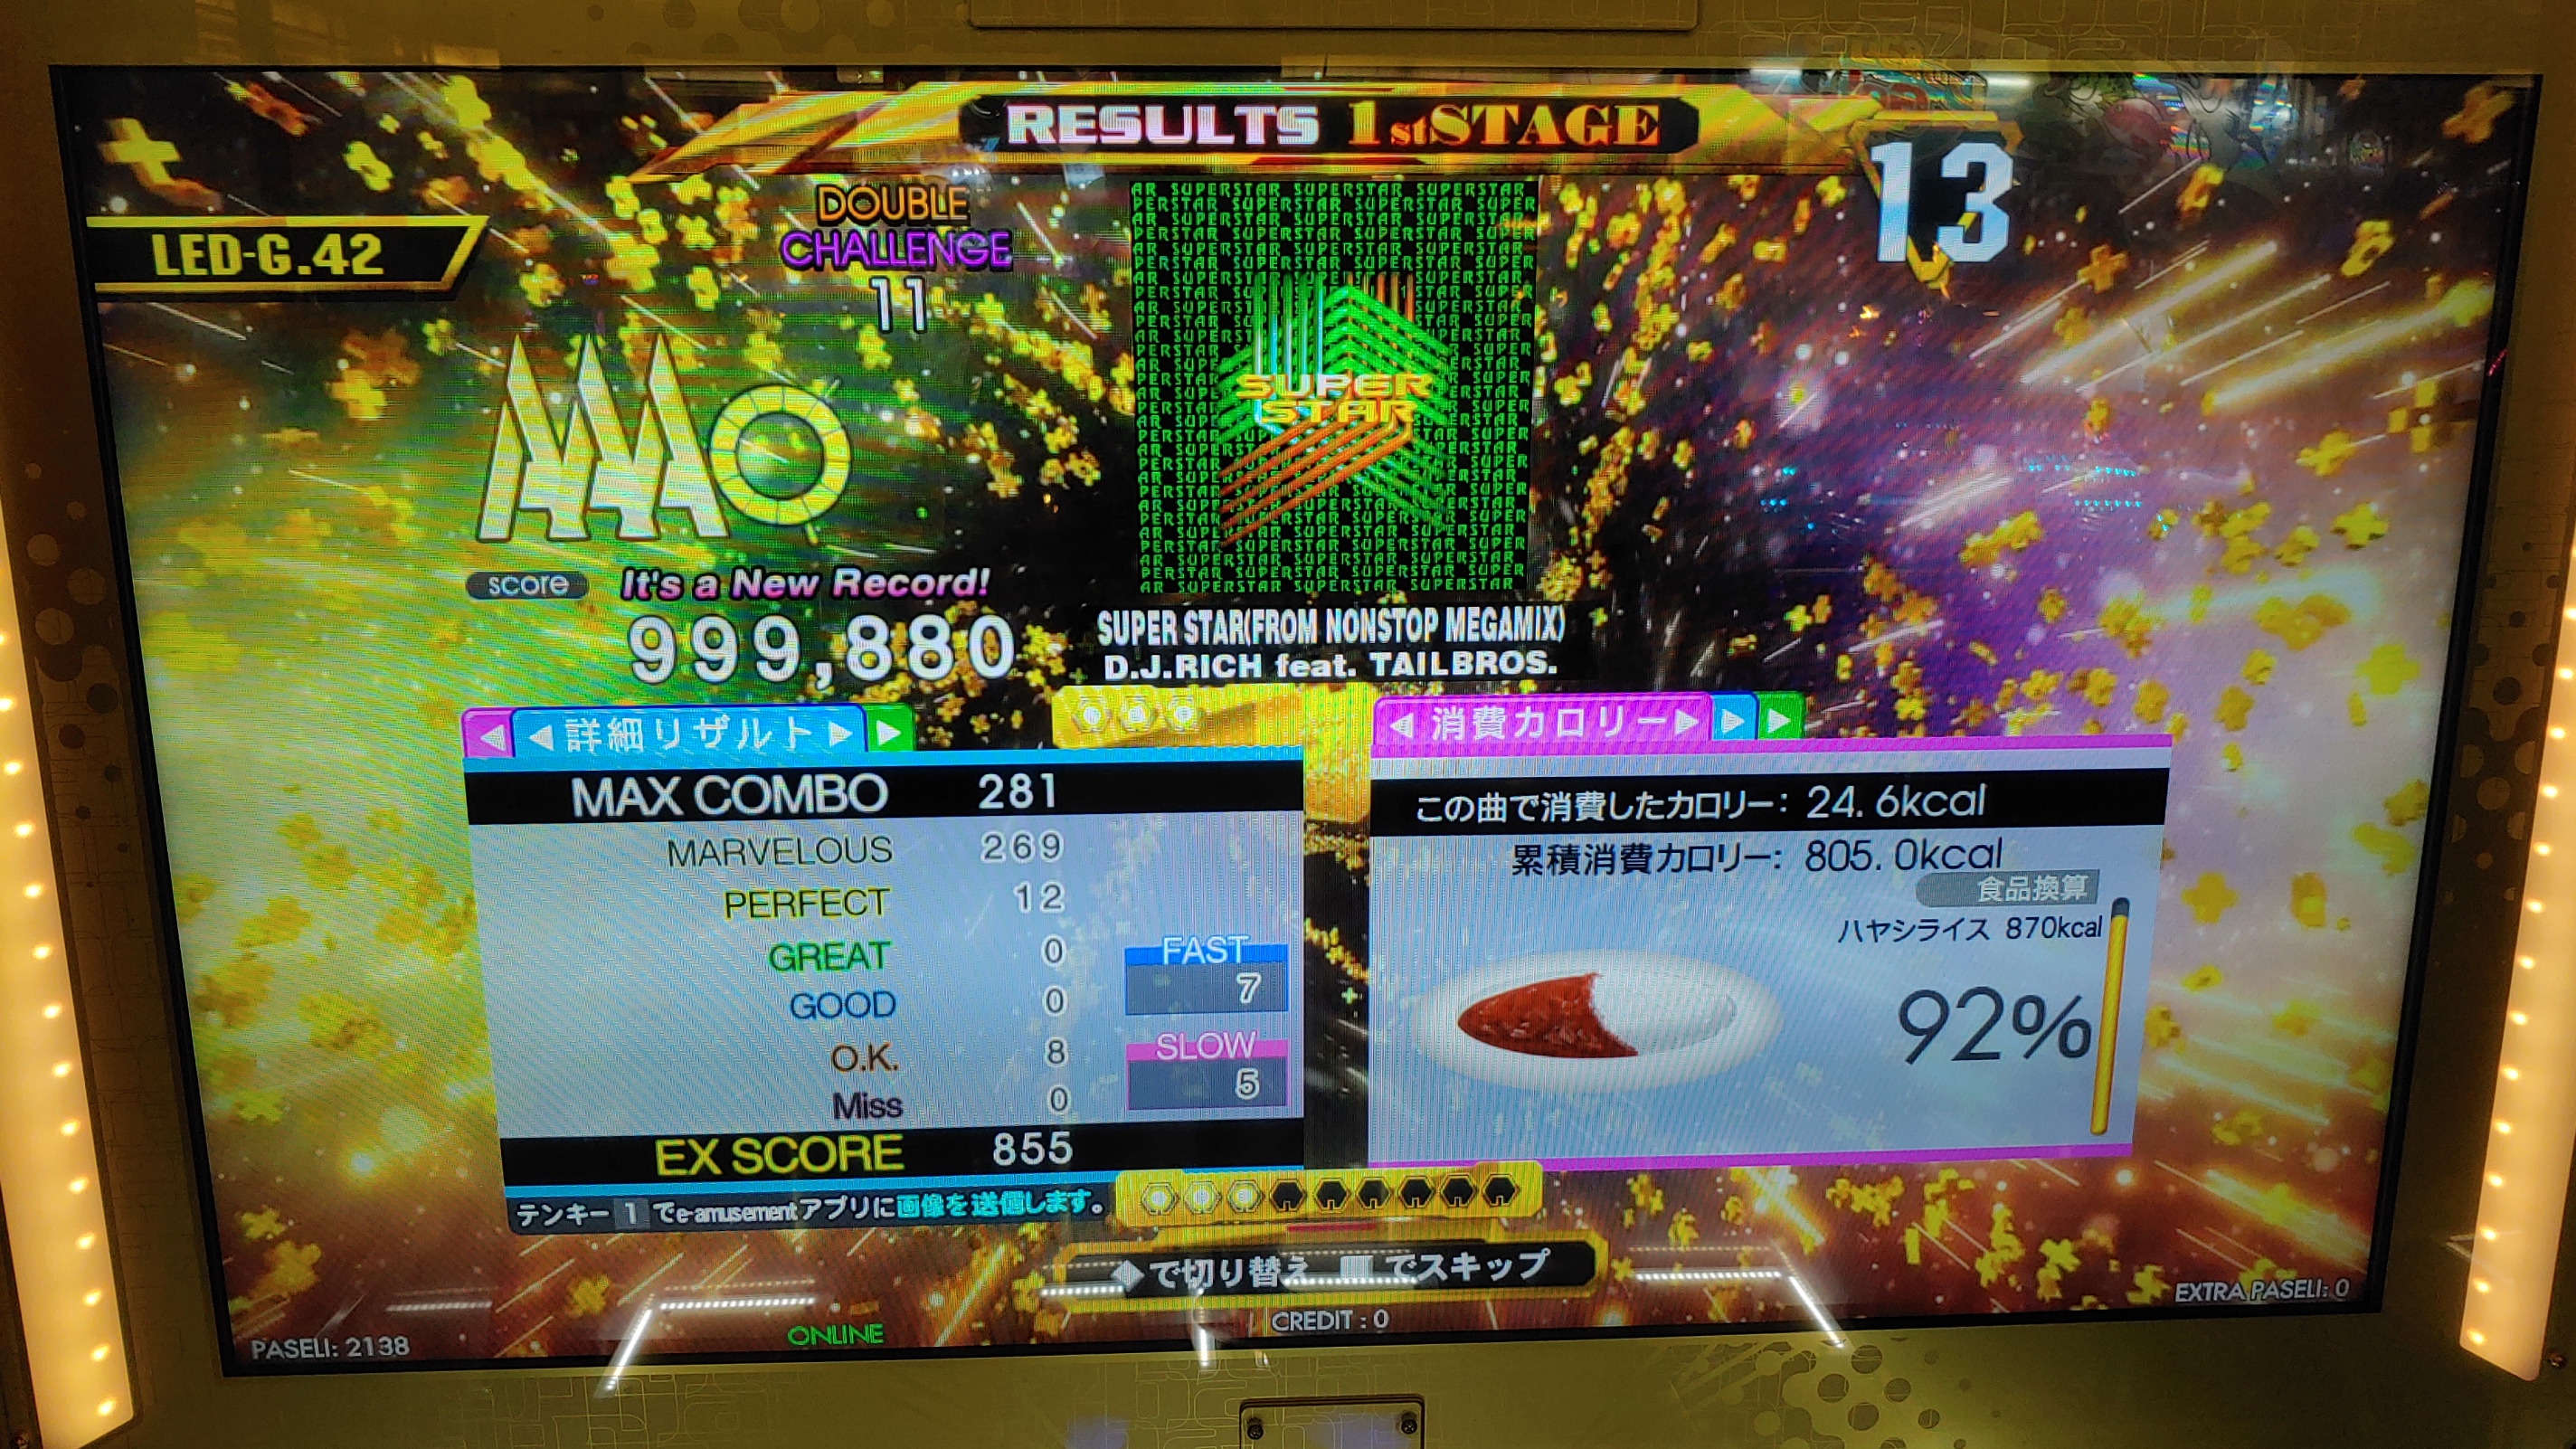 SUPER STAR (FROM NONSTOP MEGAMIX) CDP DDR A20 PLUS AC